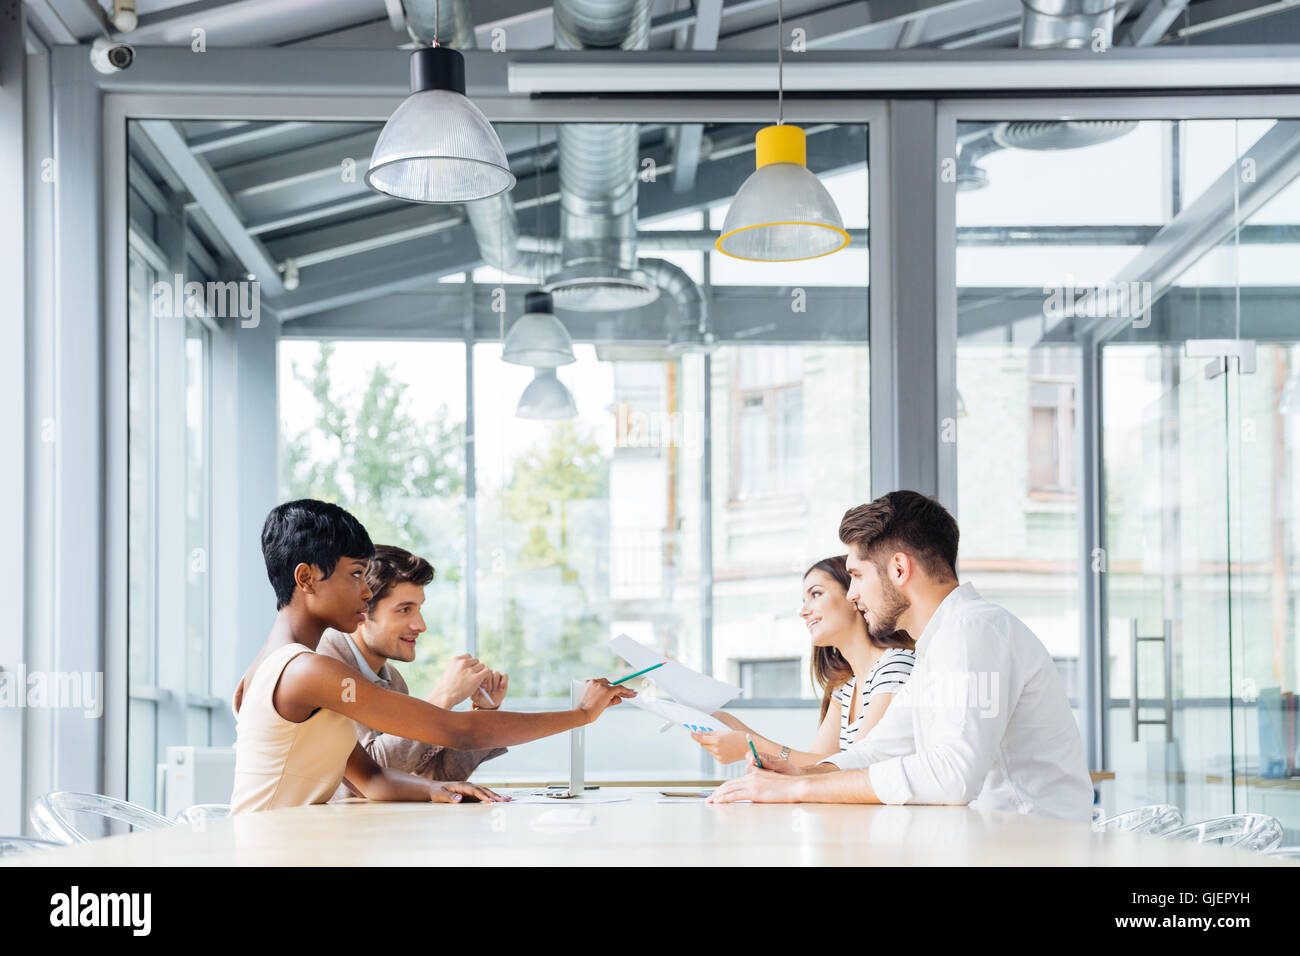 Group of young businesspeople talking and working together in conference room Stock Photo